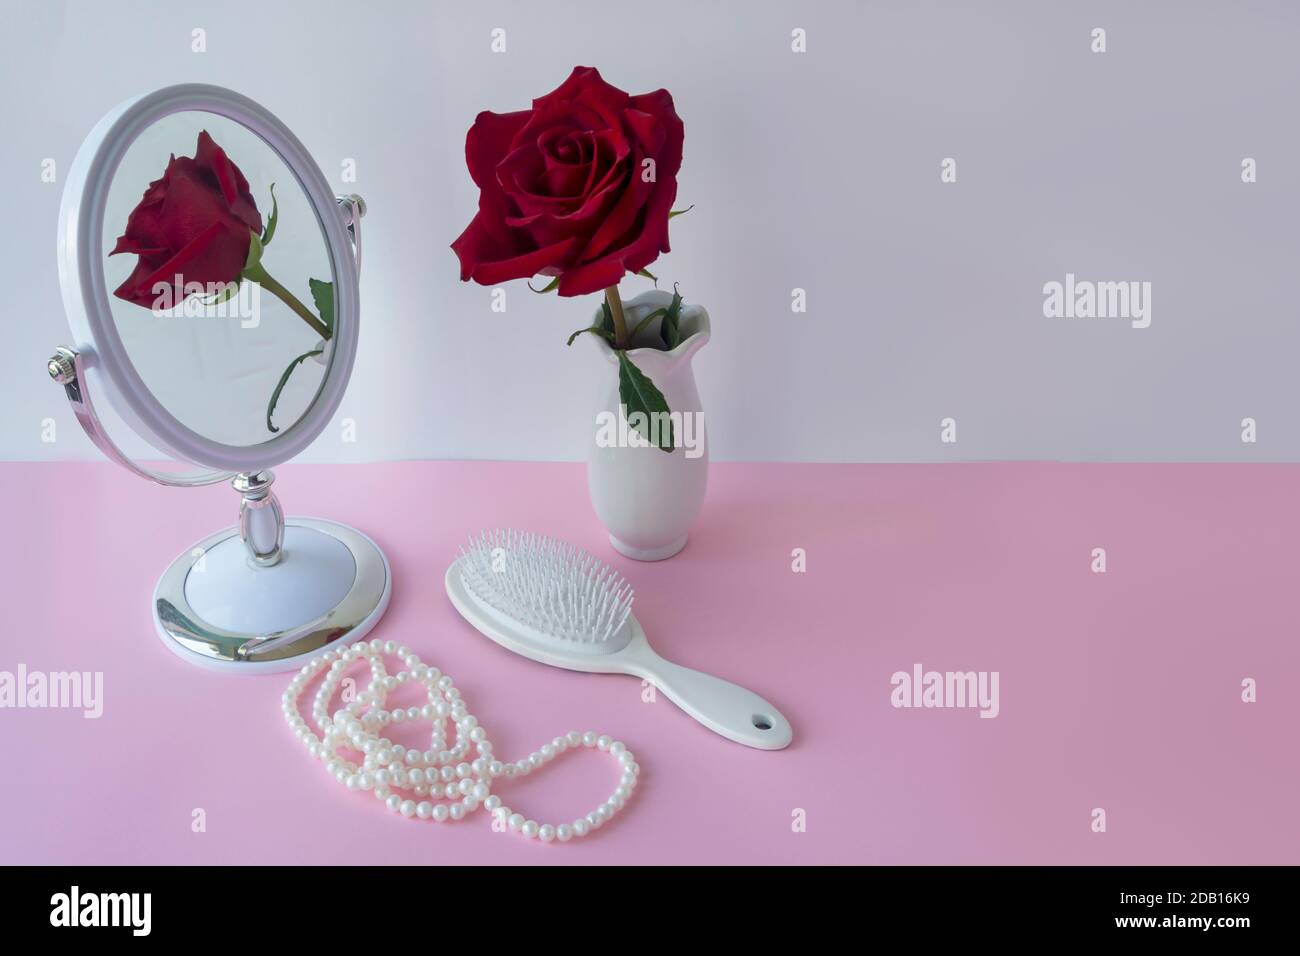 Red rose in white vase on table with hairbrush and pearls. Wedding preparation concept. Selective focus, blur. Stock Photo